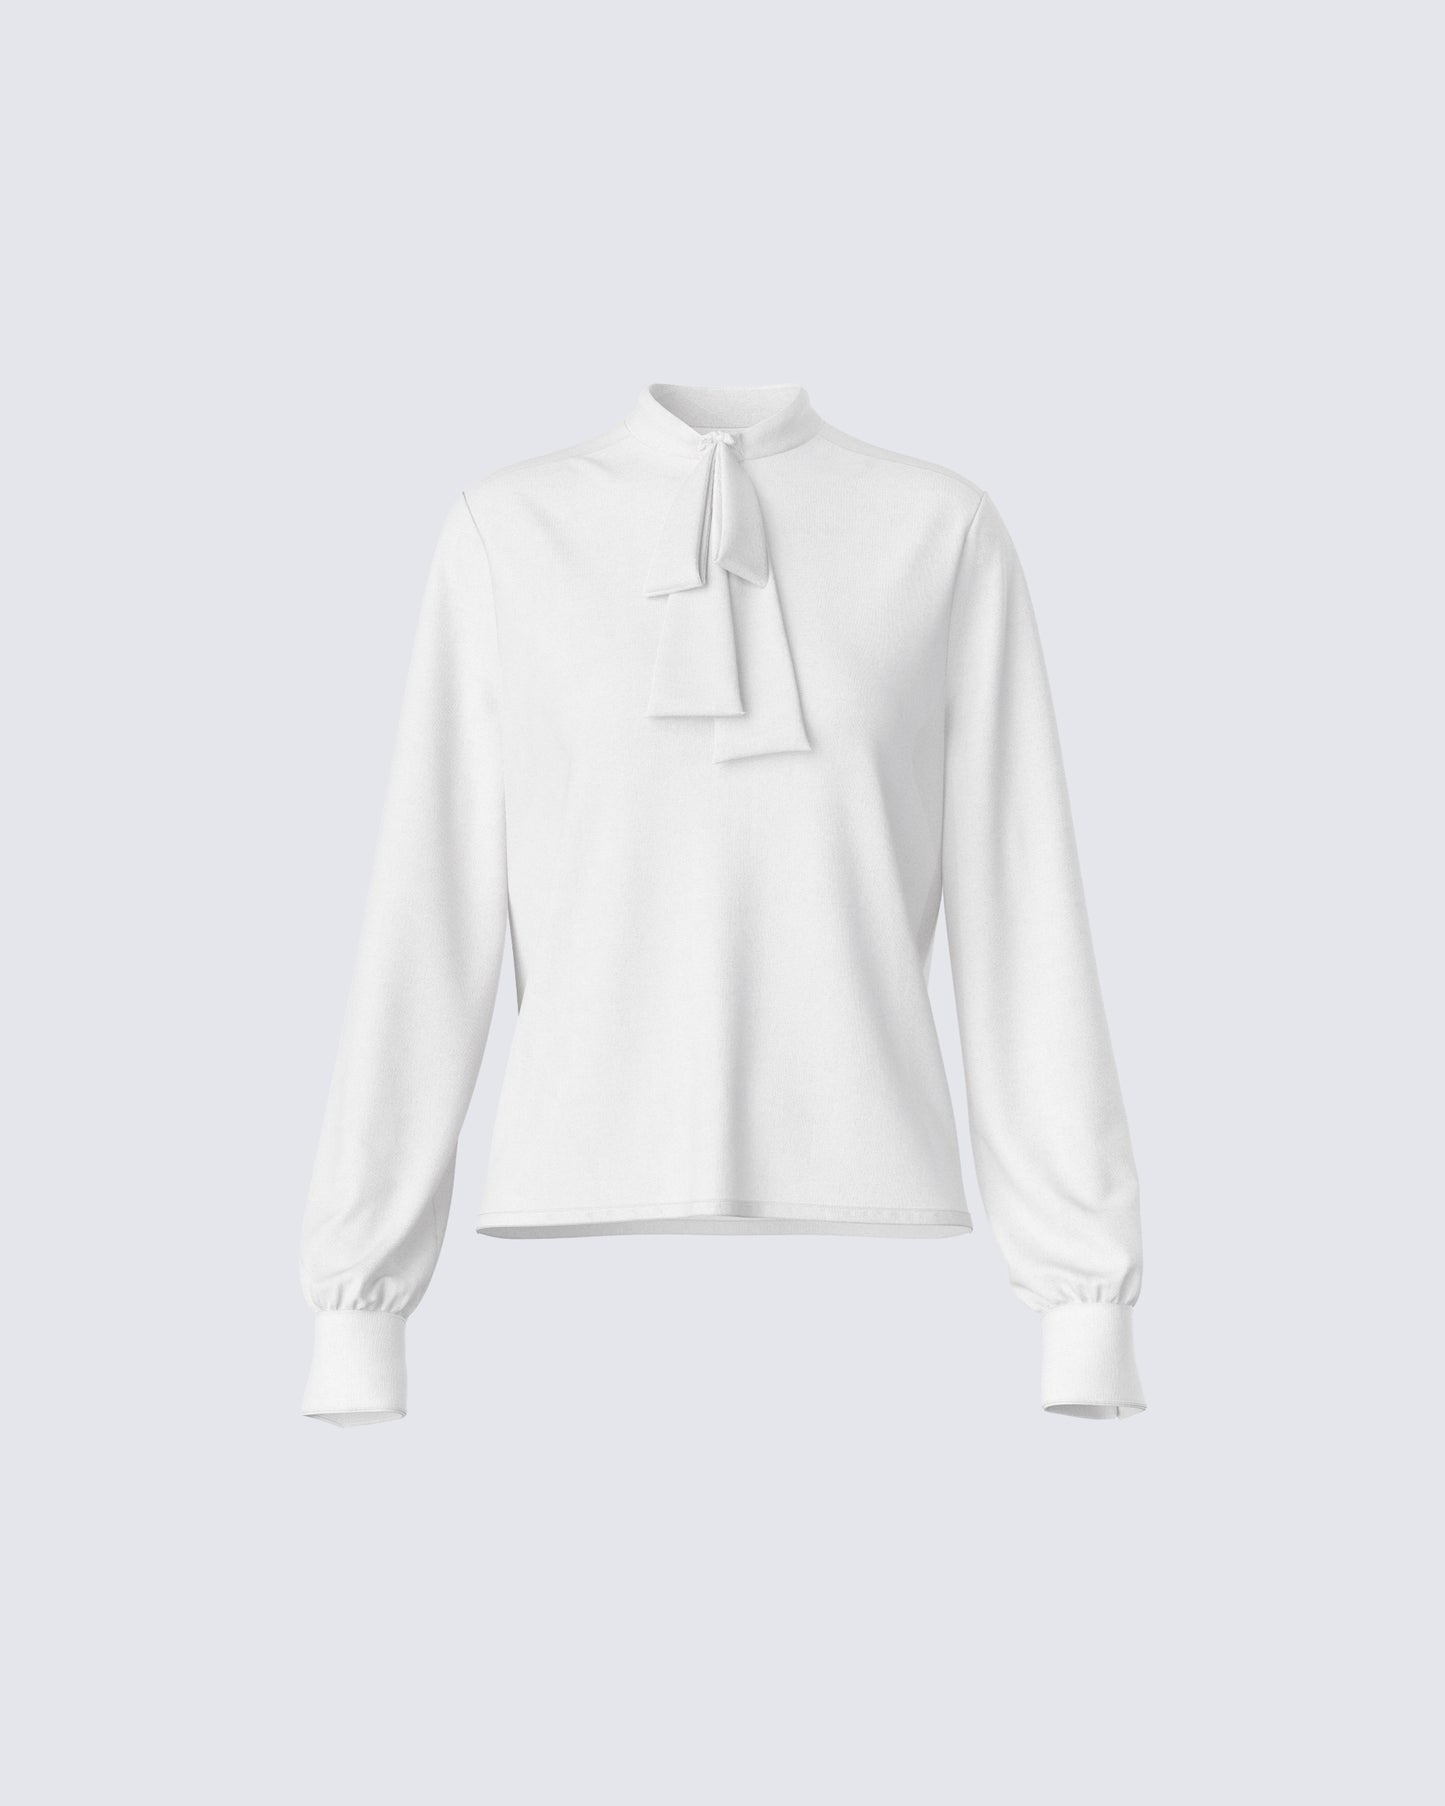 Maia White Pussy Bow Blouse